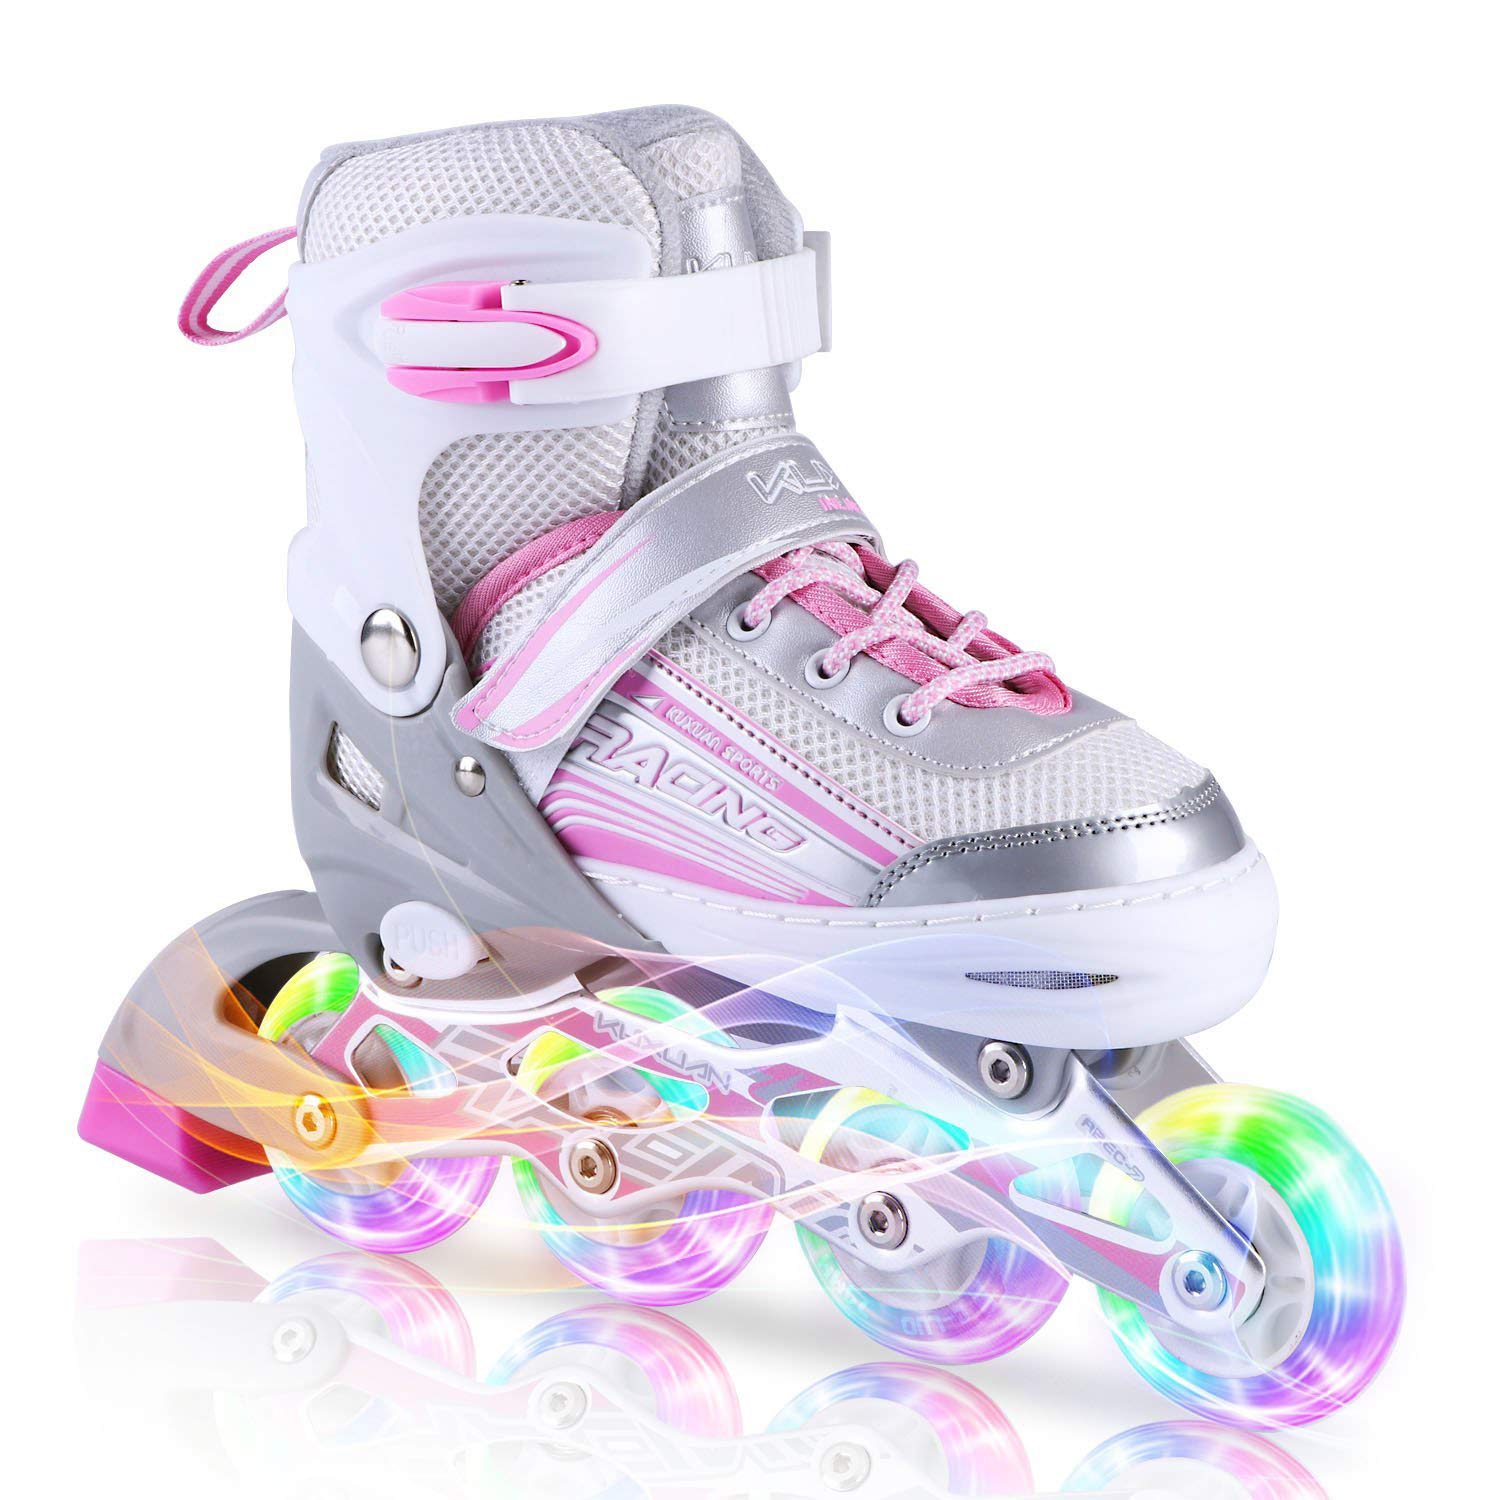 Kuxuan Inline Skates Adjustable for Kids,Girls Skates with All Wheels Light up, Fun Illuminating for Girls and Ladies